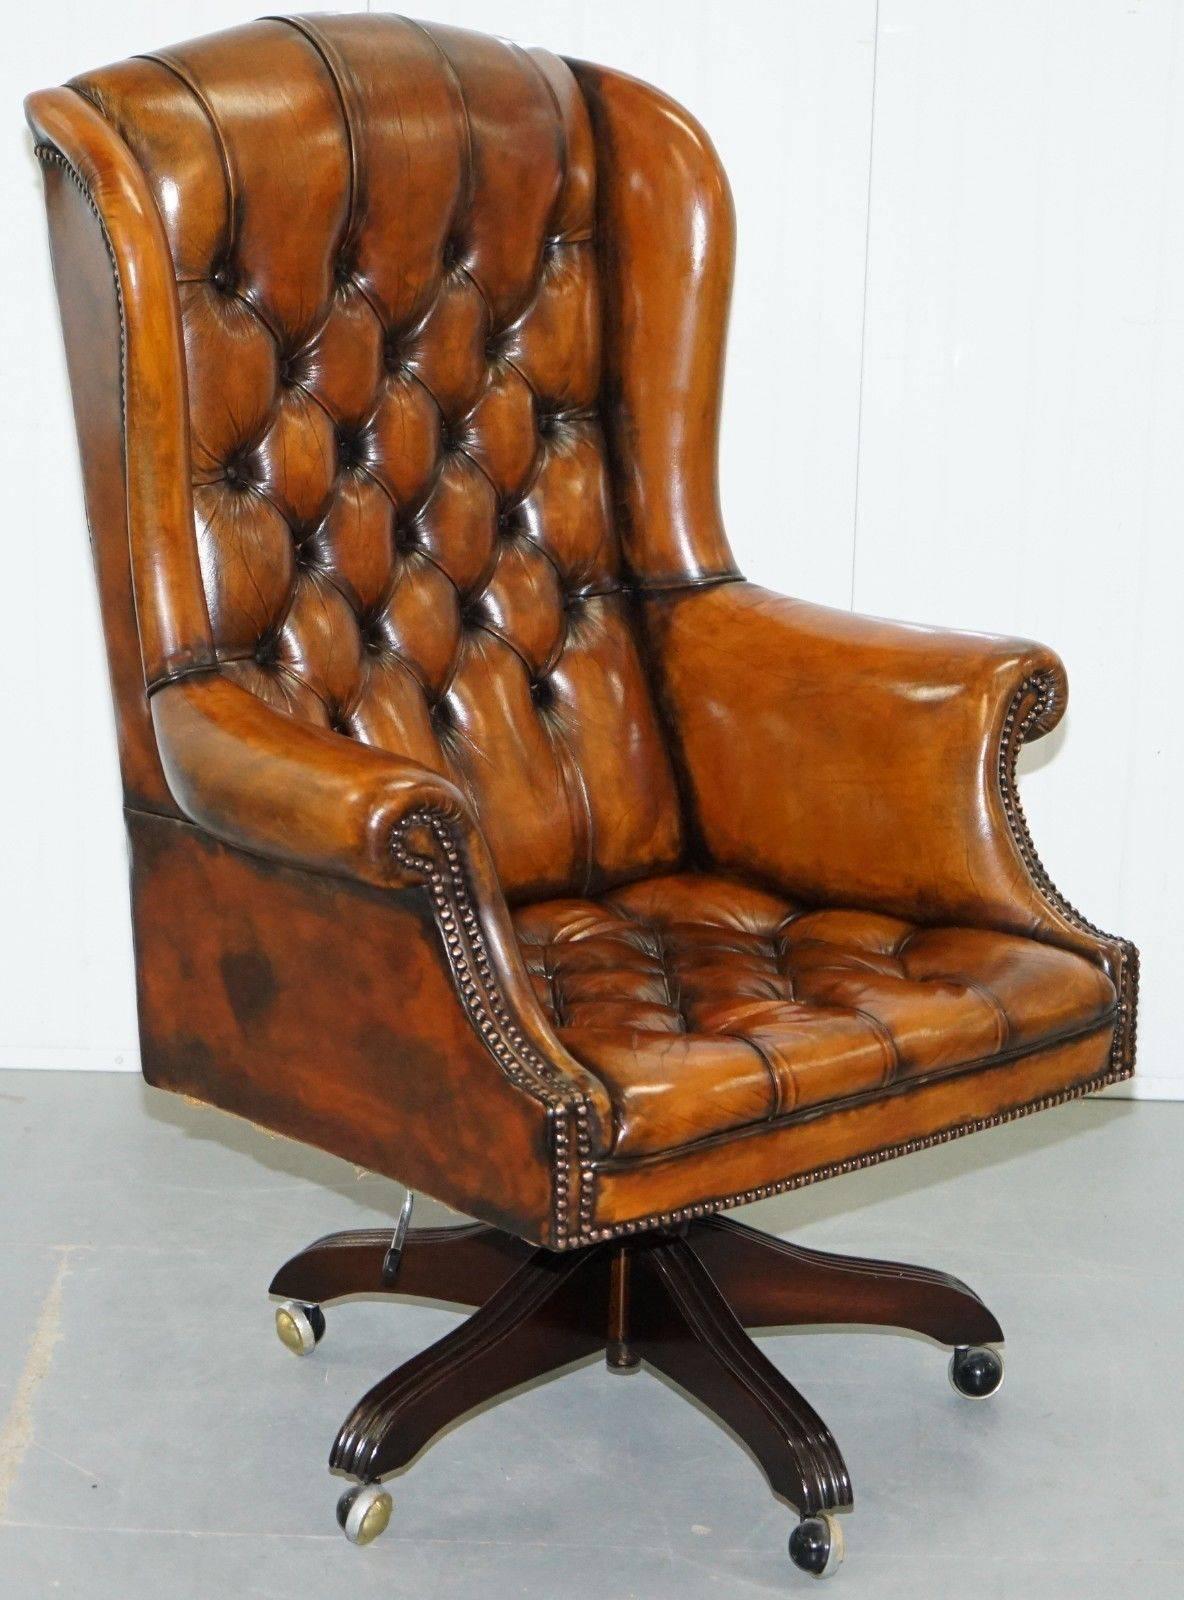 20th Century 1 of 2 of Matching Chesterfield Wingback Office Chairs Hand-Dyed Brown Leather